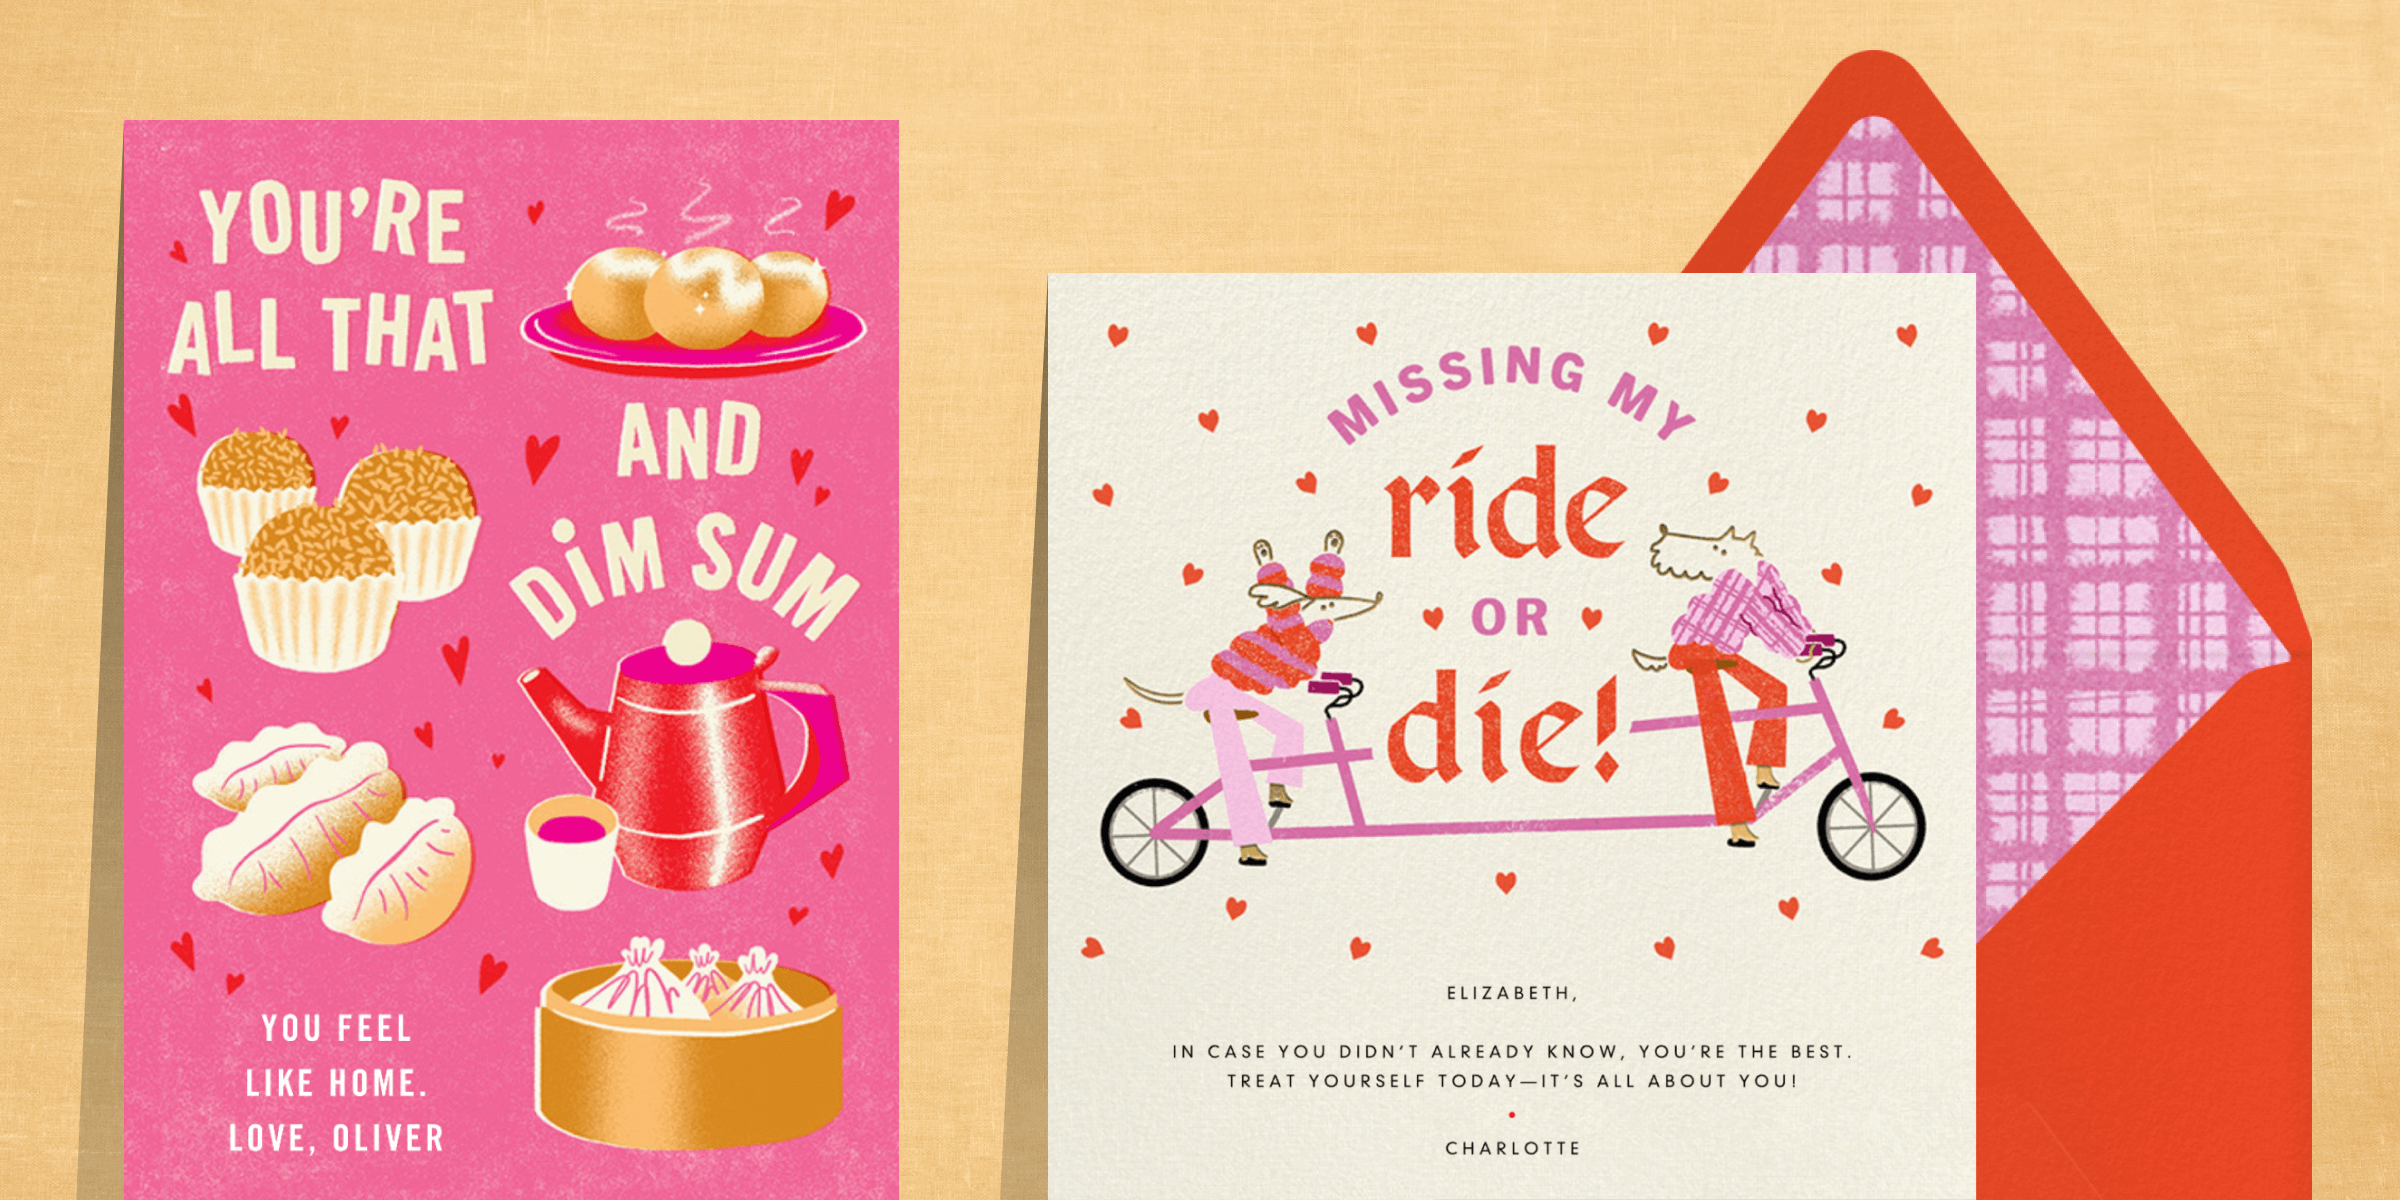 Two side-by-side Valentine’s Day cards. Left - A pink card with illustrations of dim sum food items like dumplings, buns, and tea paired with the phrase “You’re all that and dim sum.” Right - A square card with an illustration of two dogs riding a tandem bike with the phrase “Missing my ride or die!” It’s paired with a red envelope with a pink plaid liner.